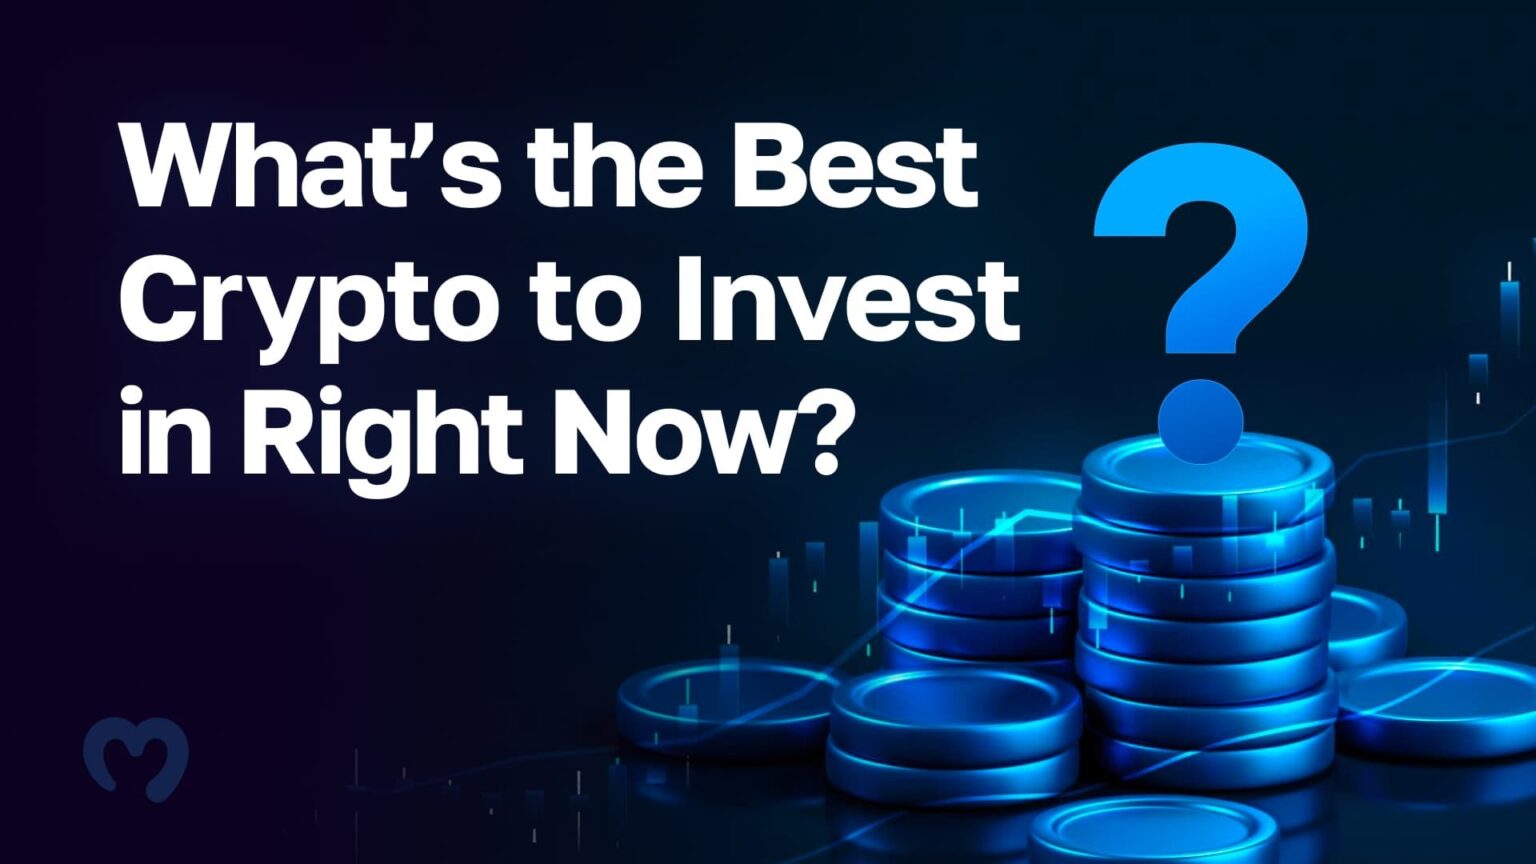 What's the Best Crypto to Invest in Right Now?